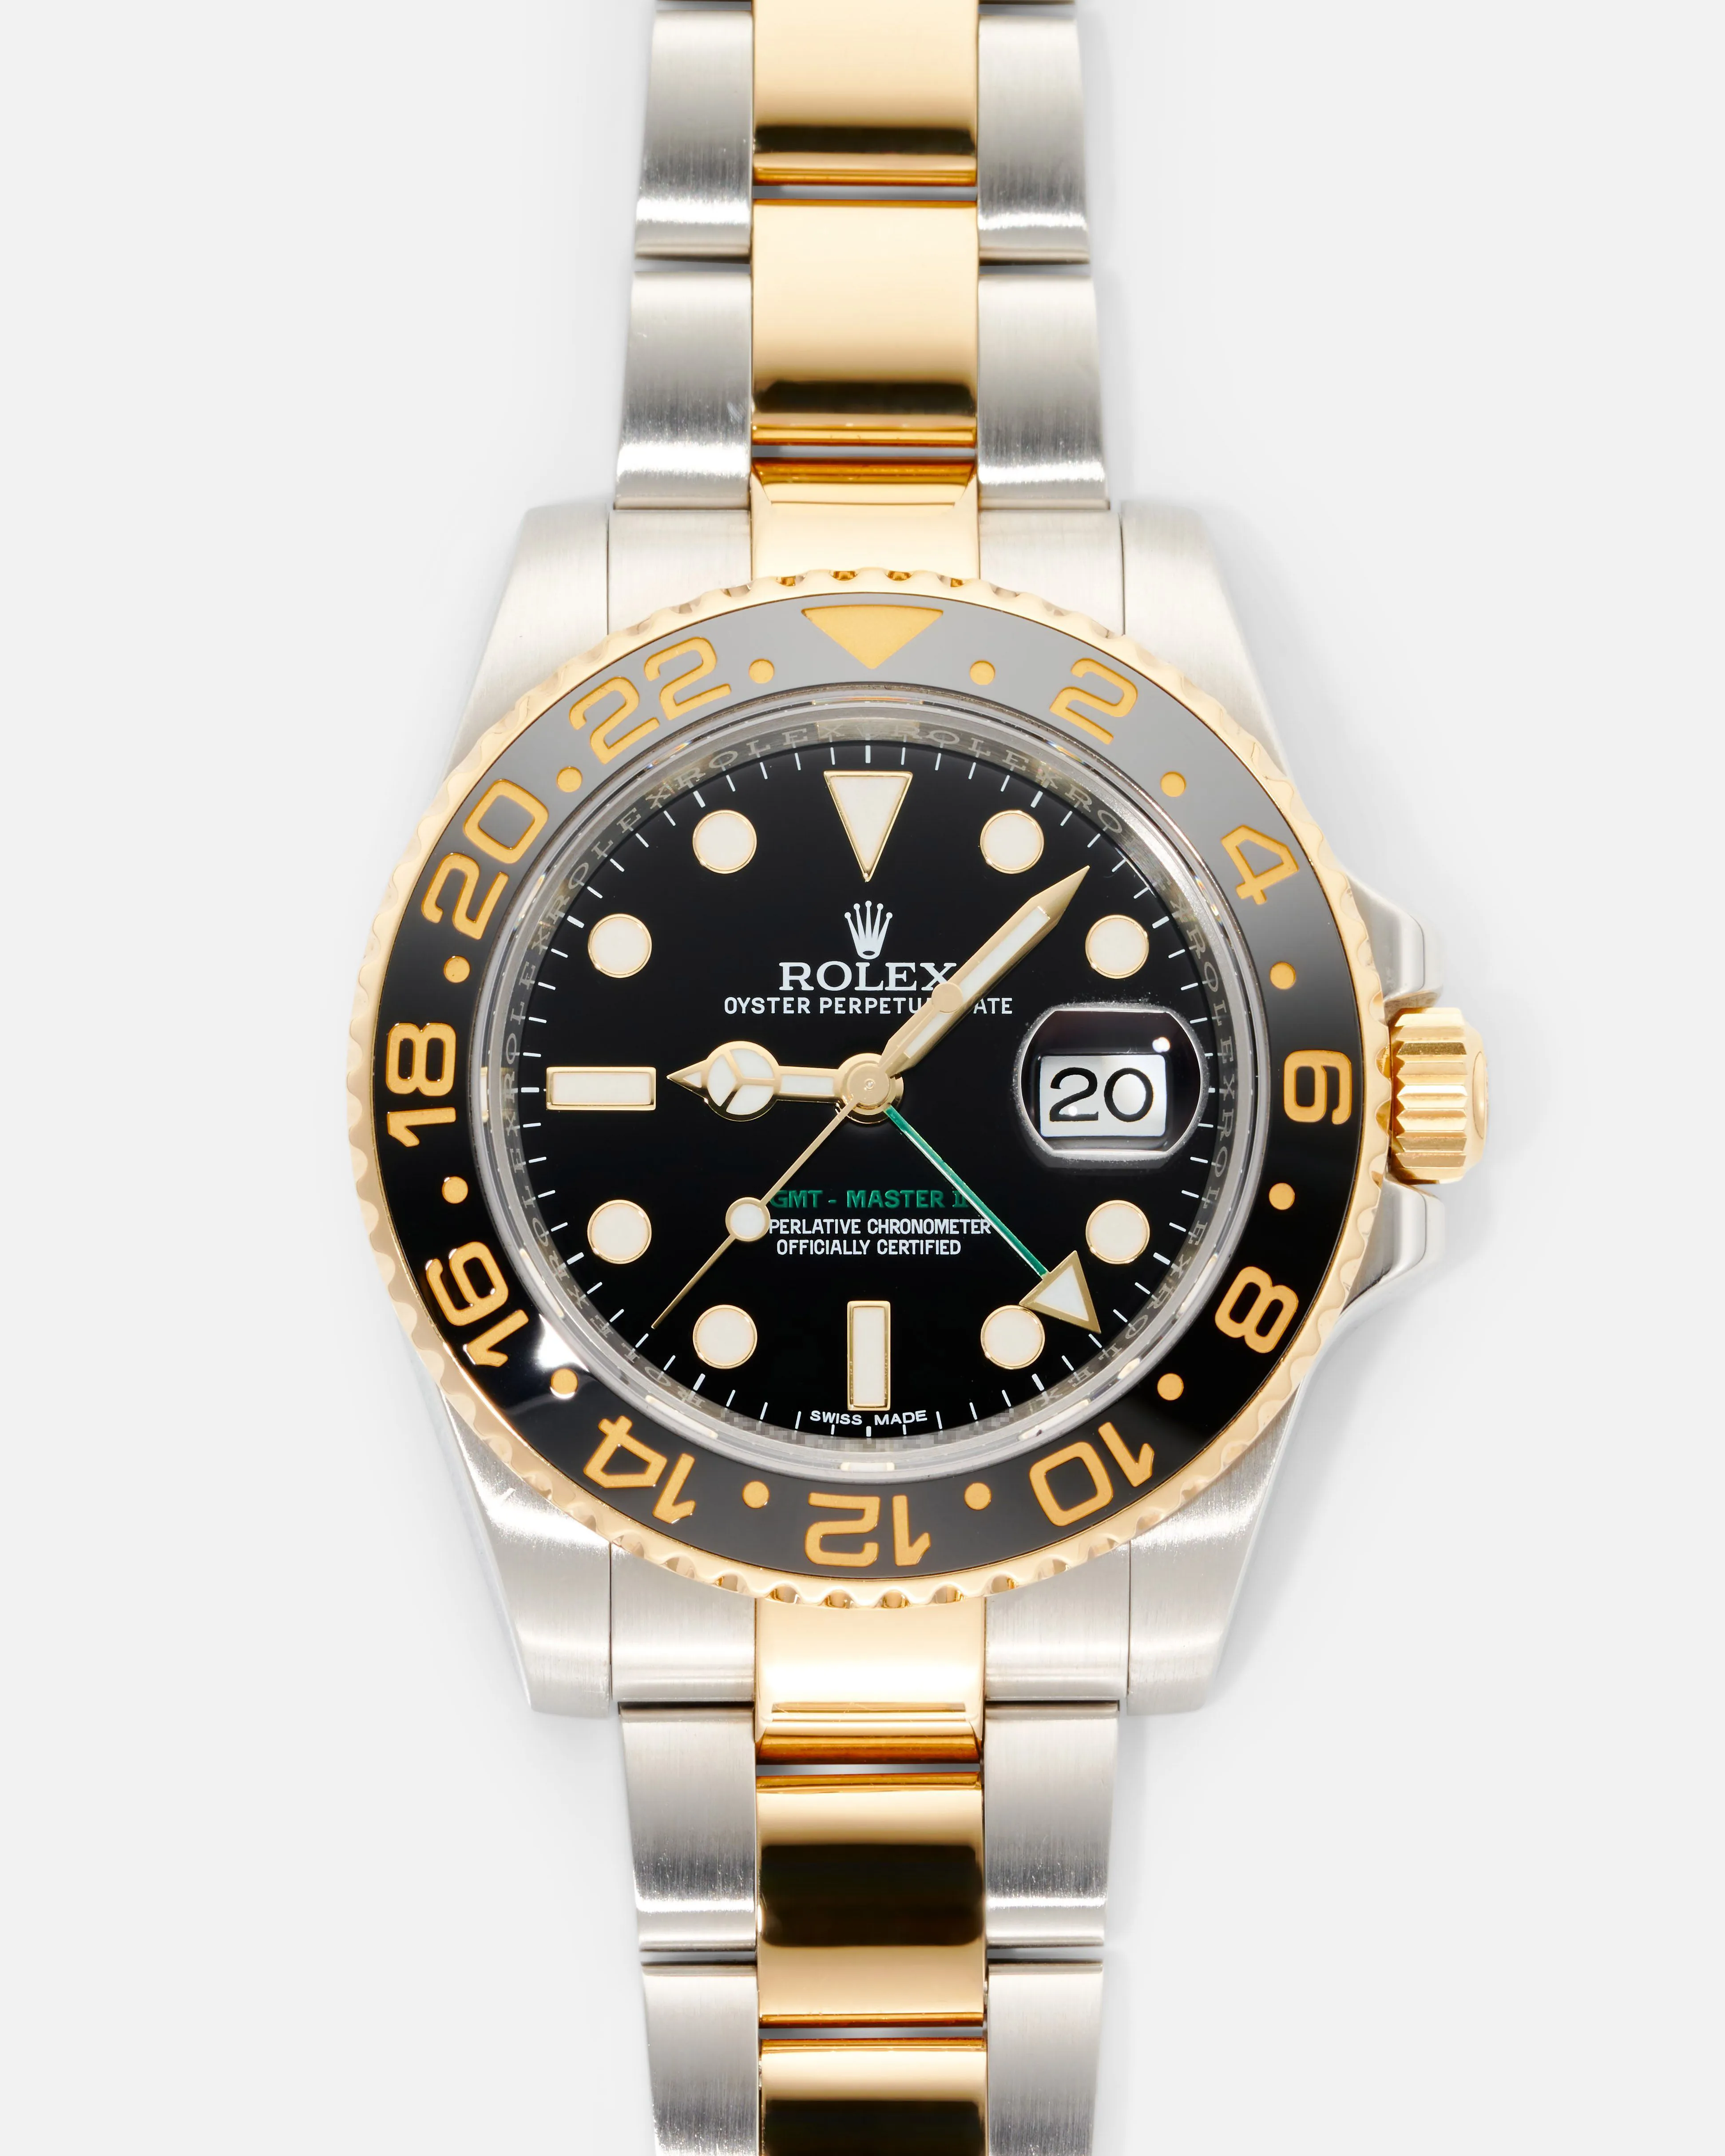 Rolex GMT-Master II 116713LN-0001 40mm Yellow gold and stainless steel